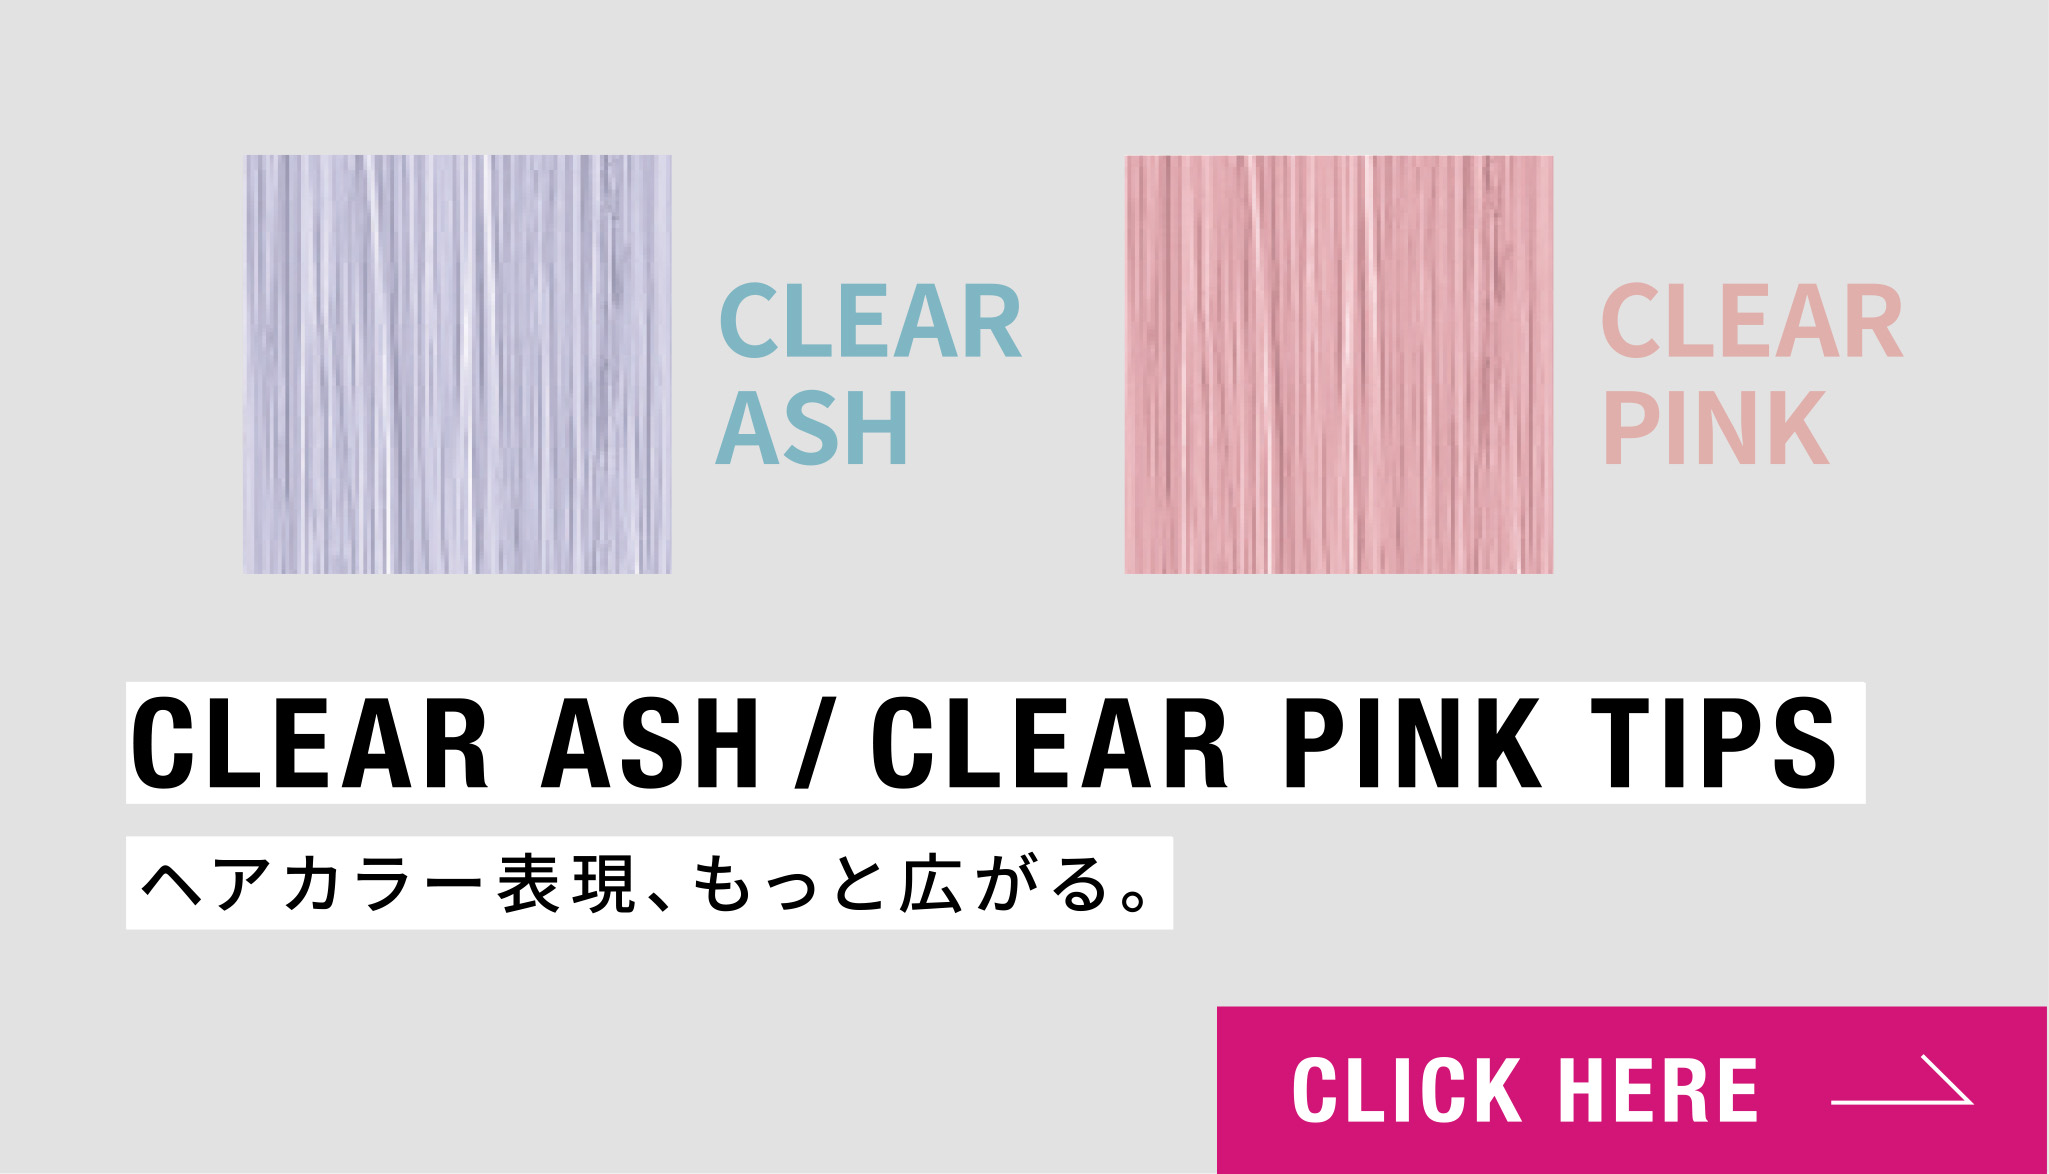 NEW! CLEAR ASH / CLEAR PINK TIPS ヘアカラー表現、もっと広がる。 CLICK HERE